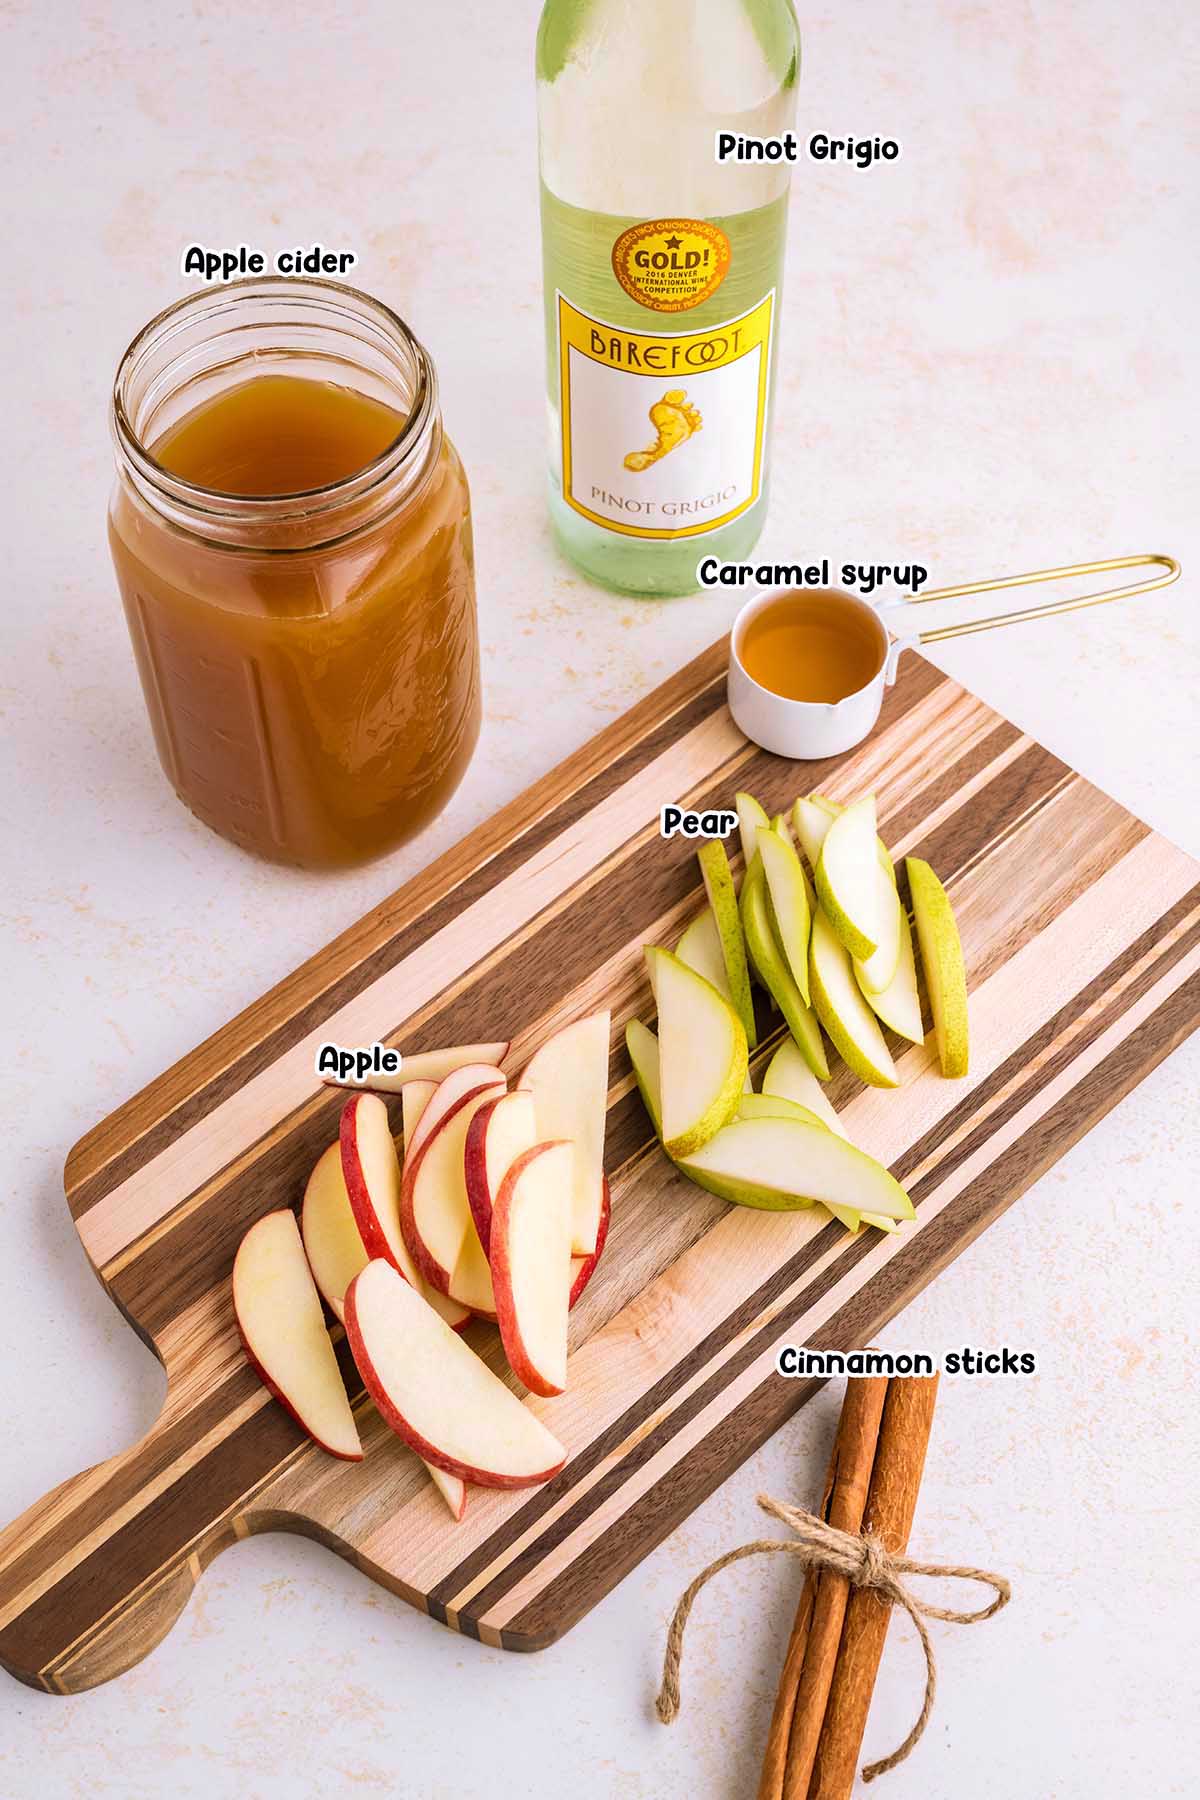 caramel apple sangria ingredients including pinot grigio, apple cider, carmel syrup, sliced apples and pears and cinnamon sticks.